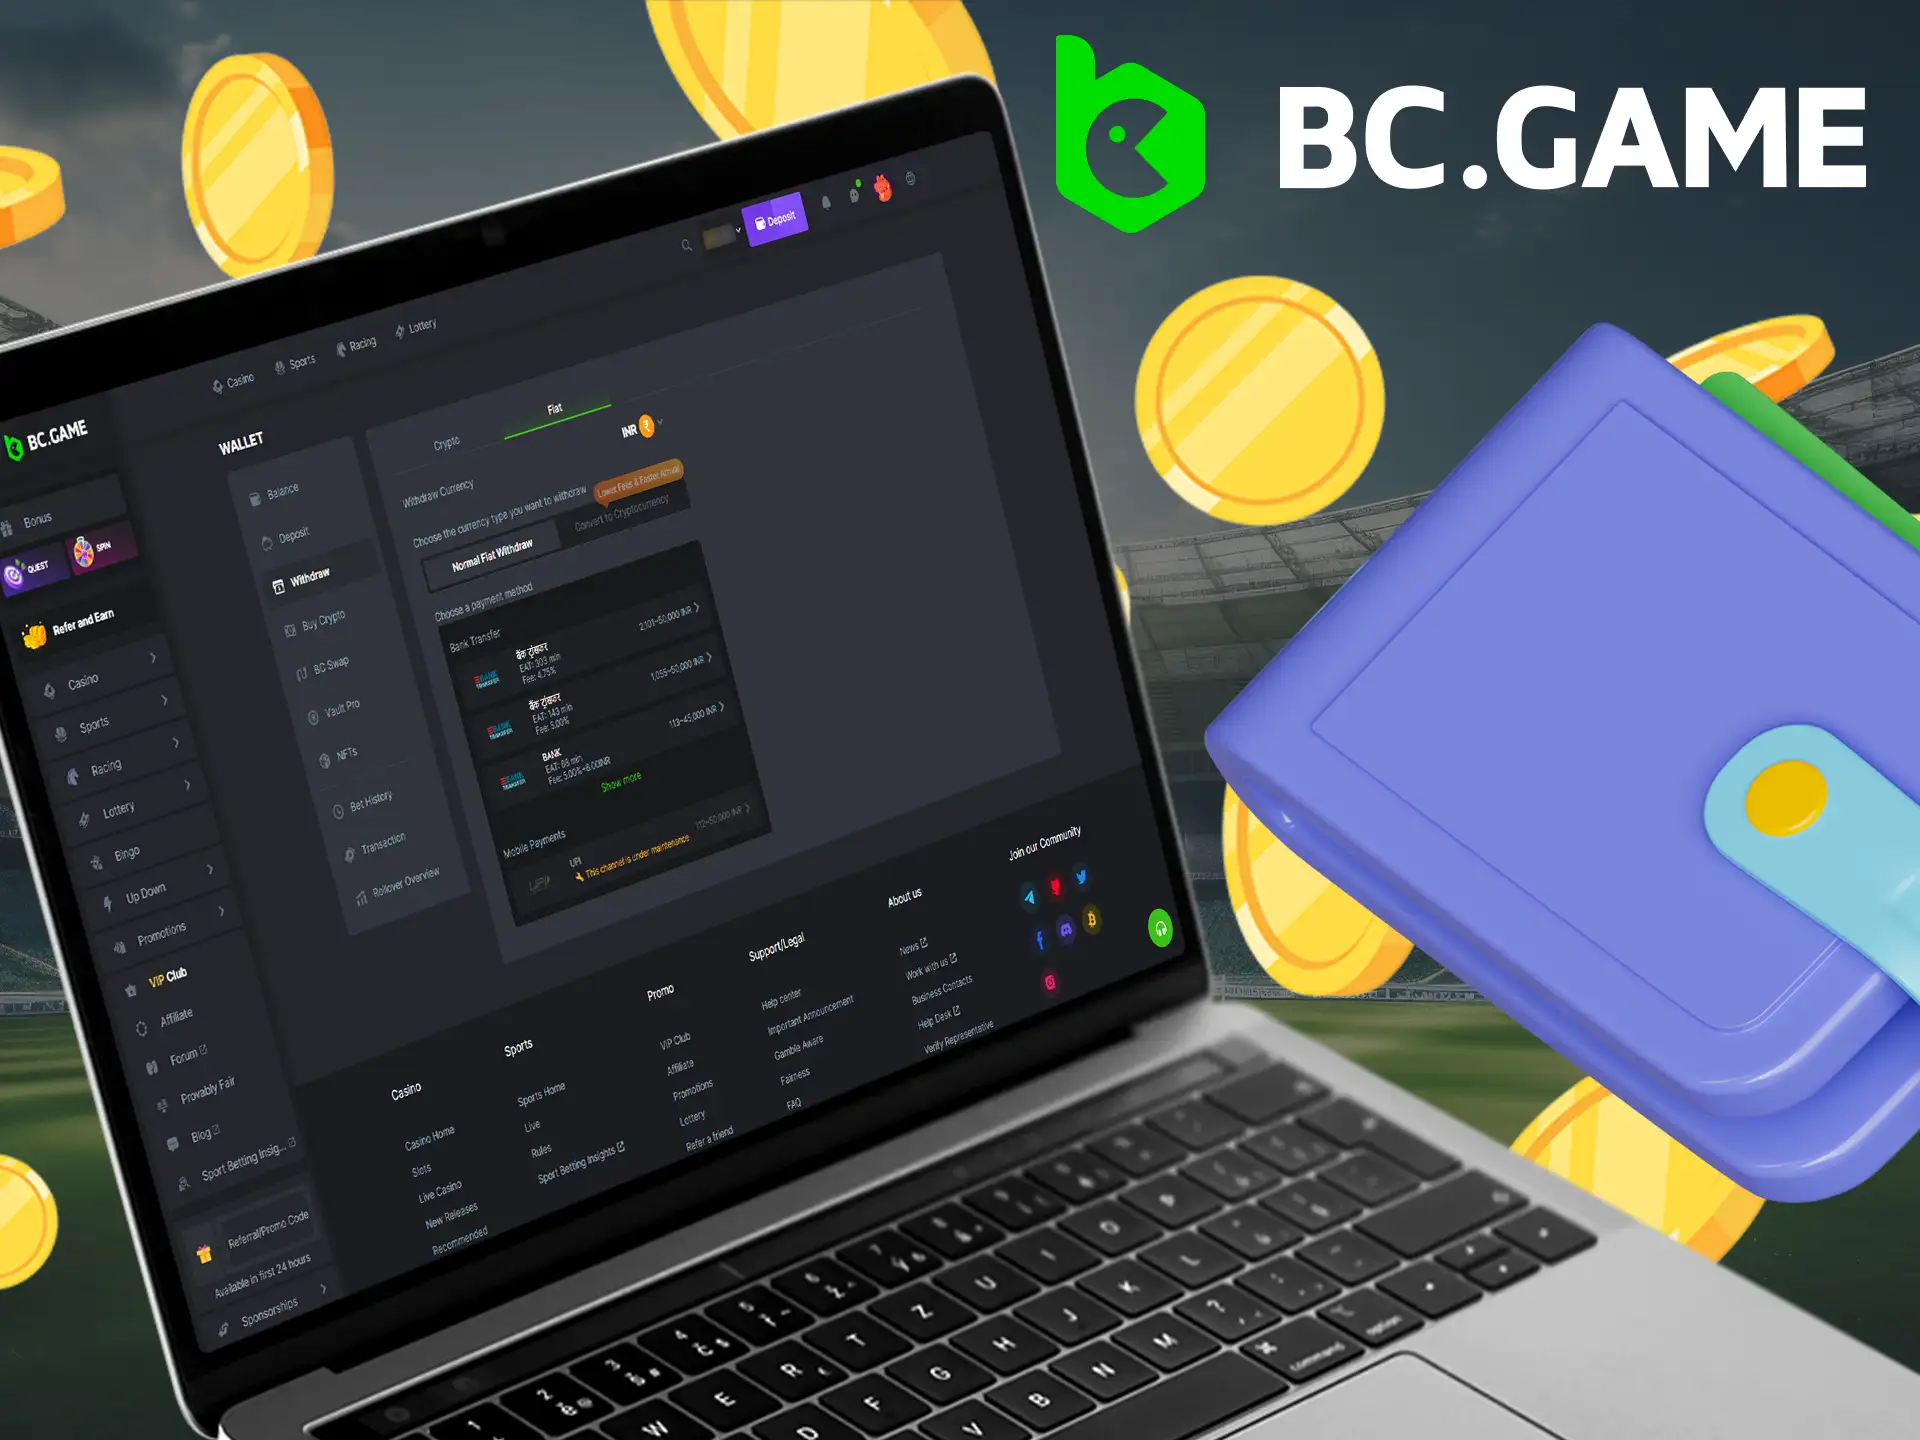 Find out more about the BC Game withdrawal procedure to receive your winnings.